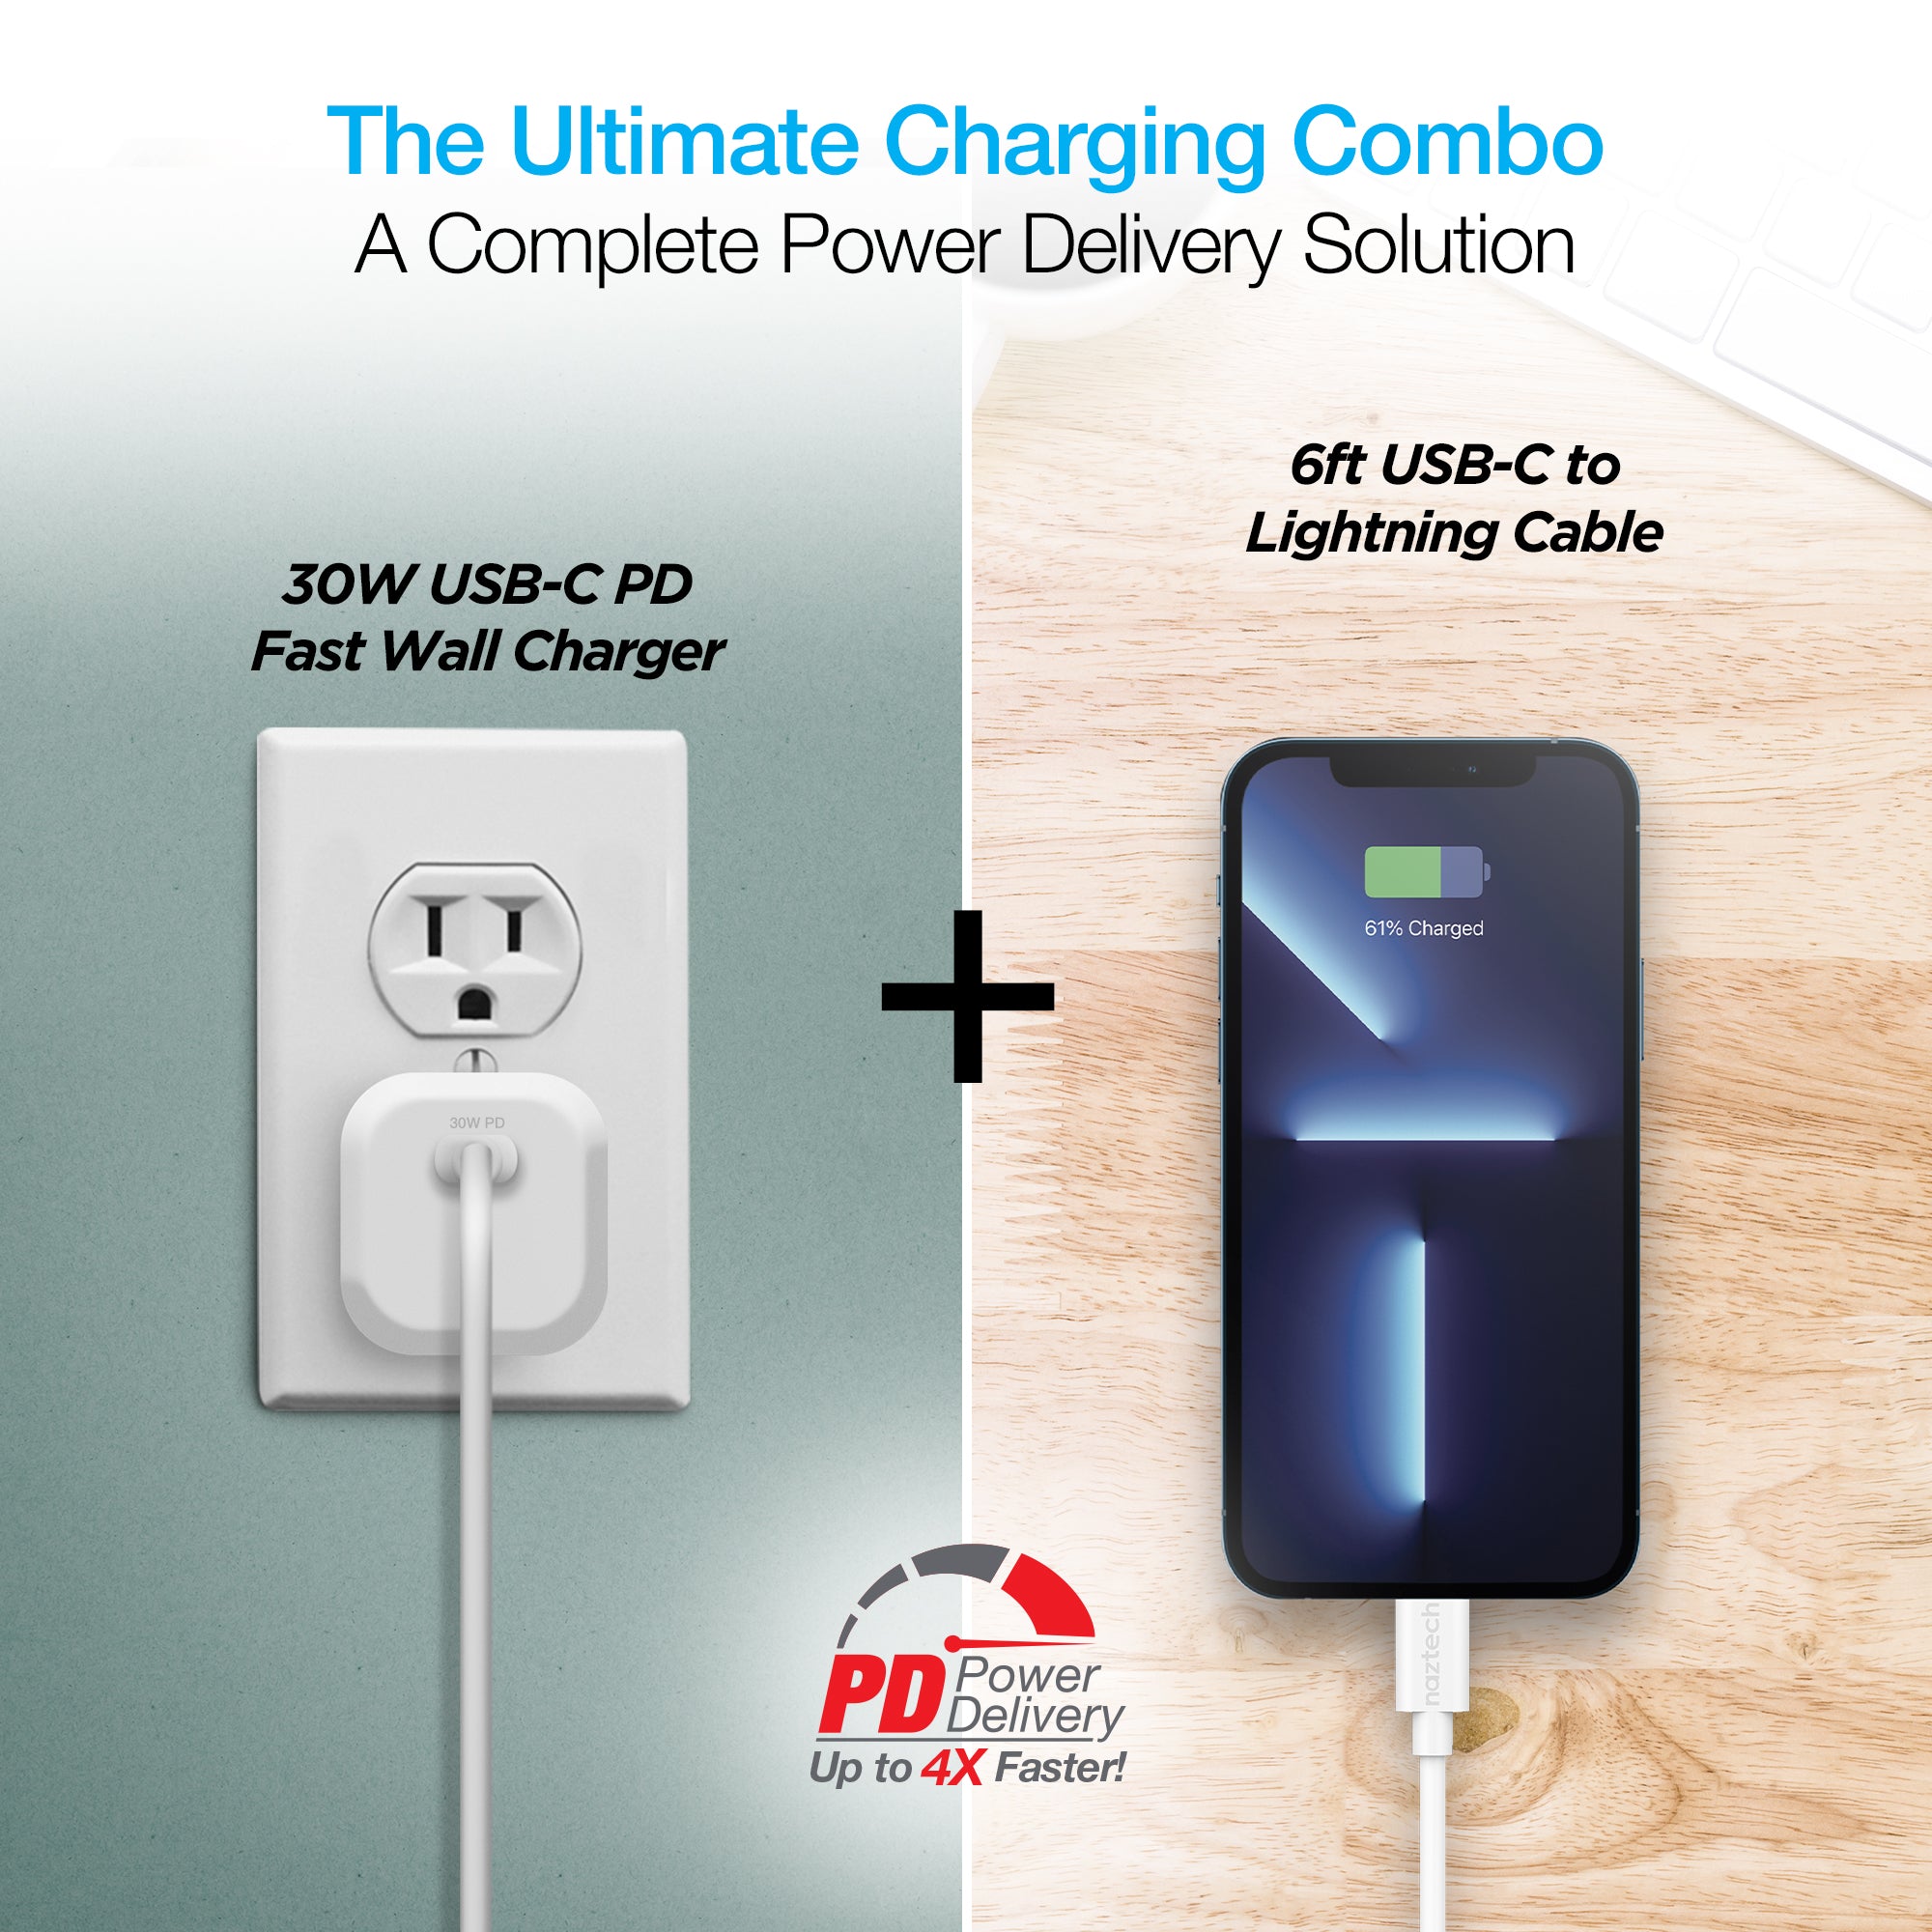 Discover 30W USB-C charger